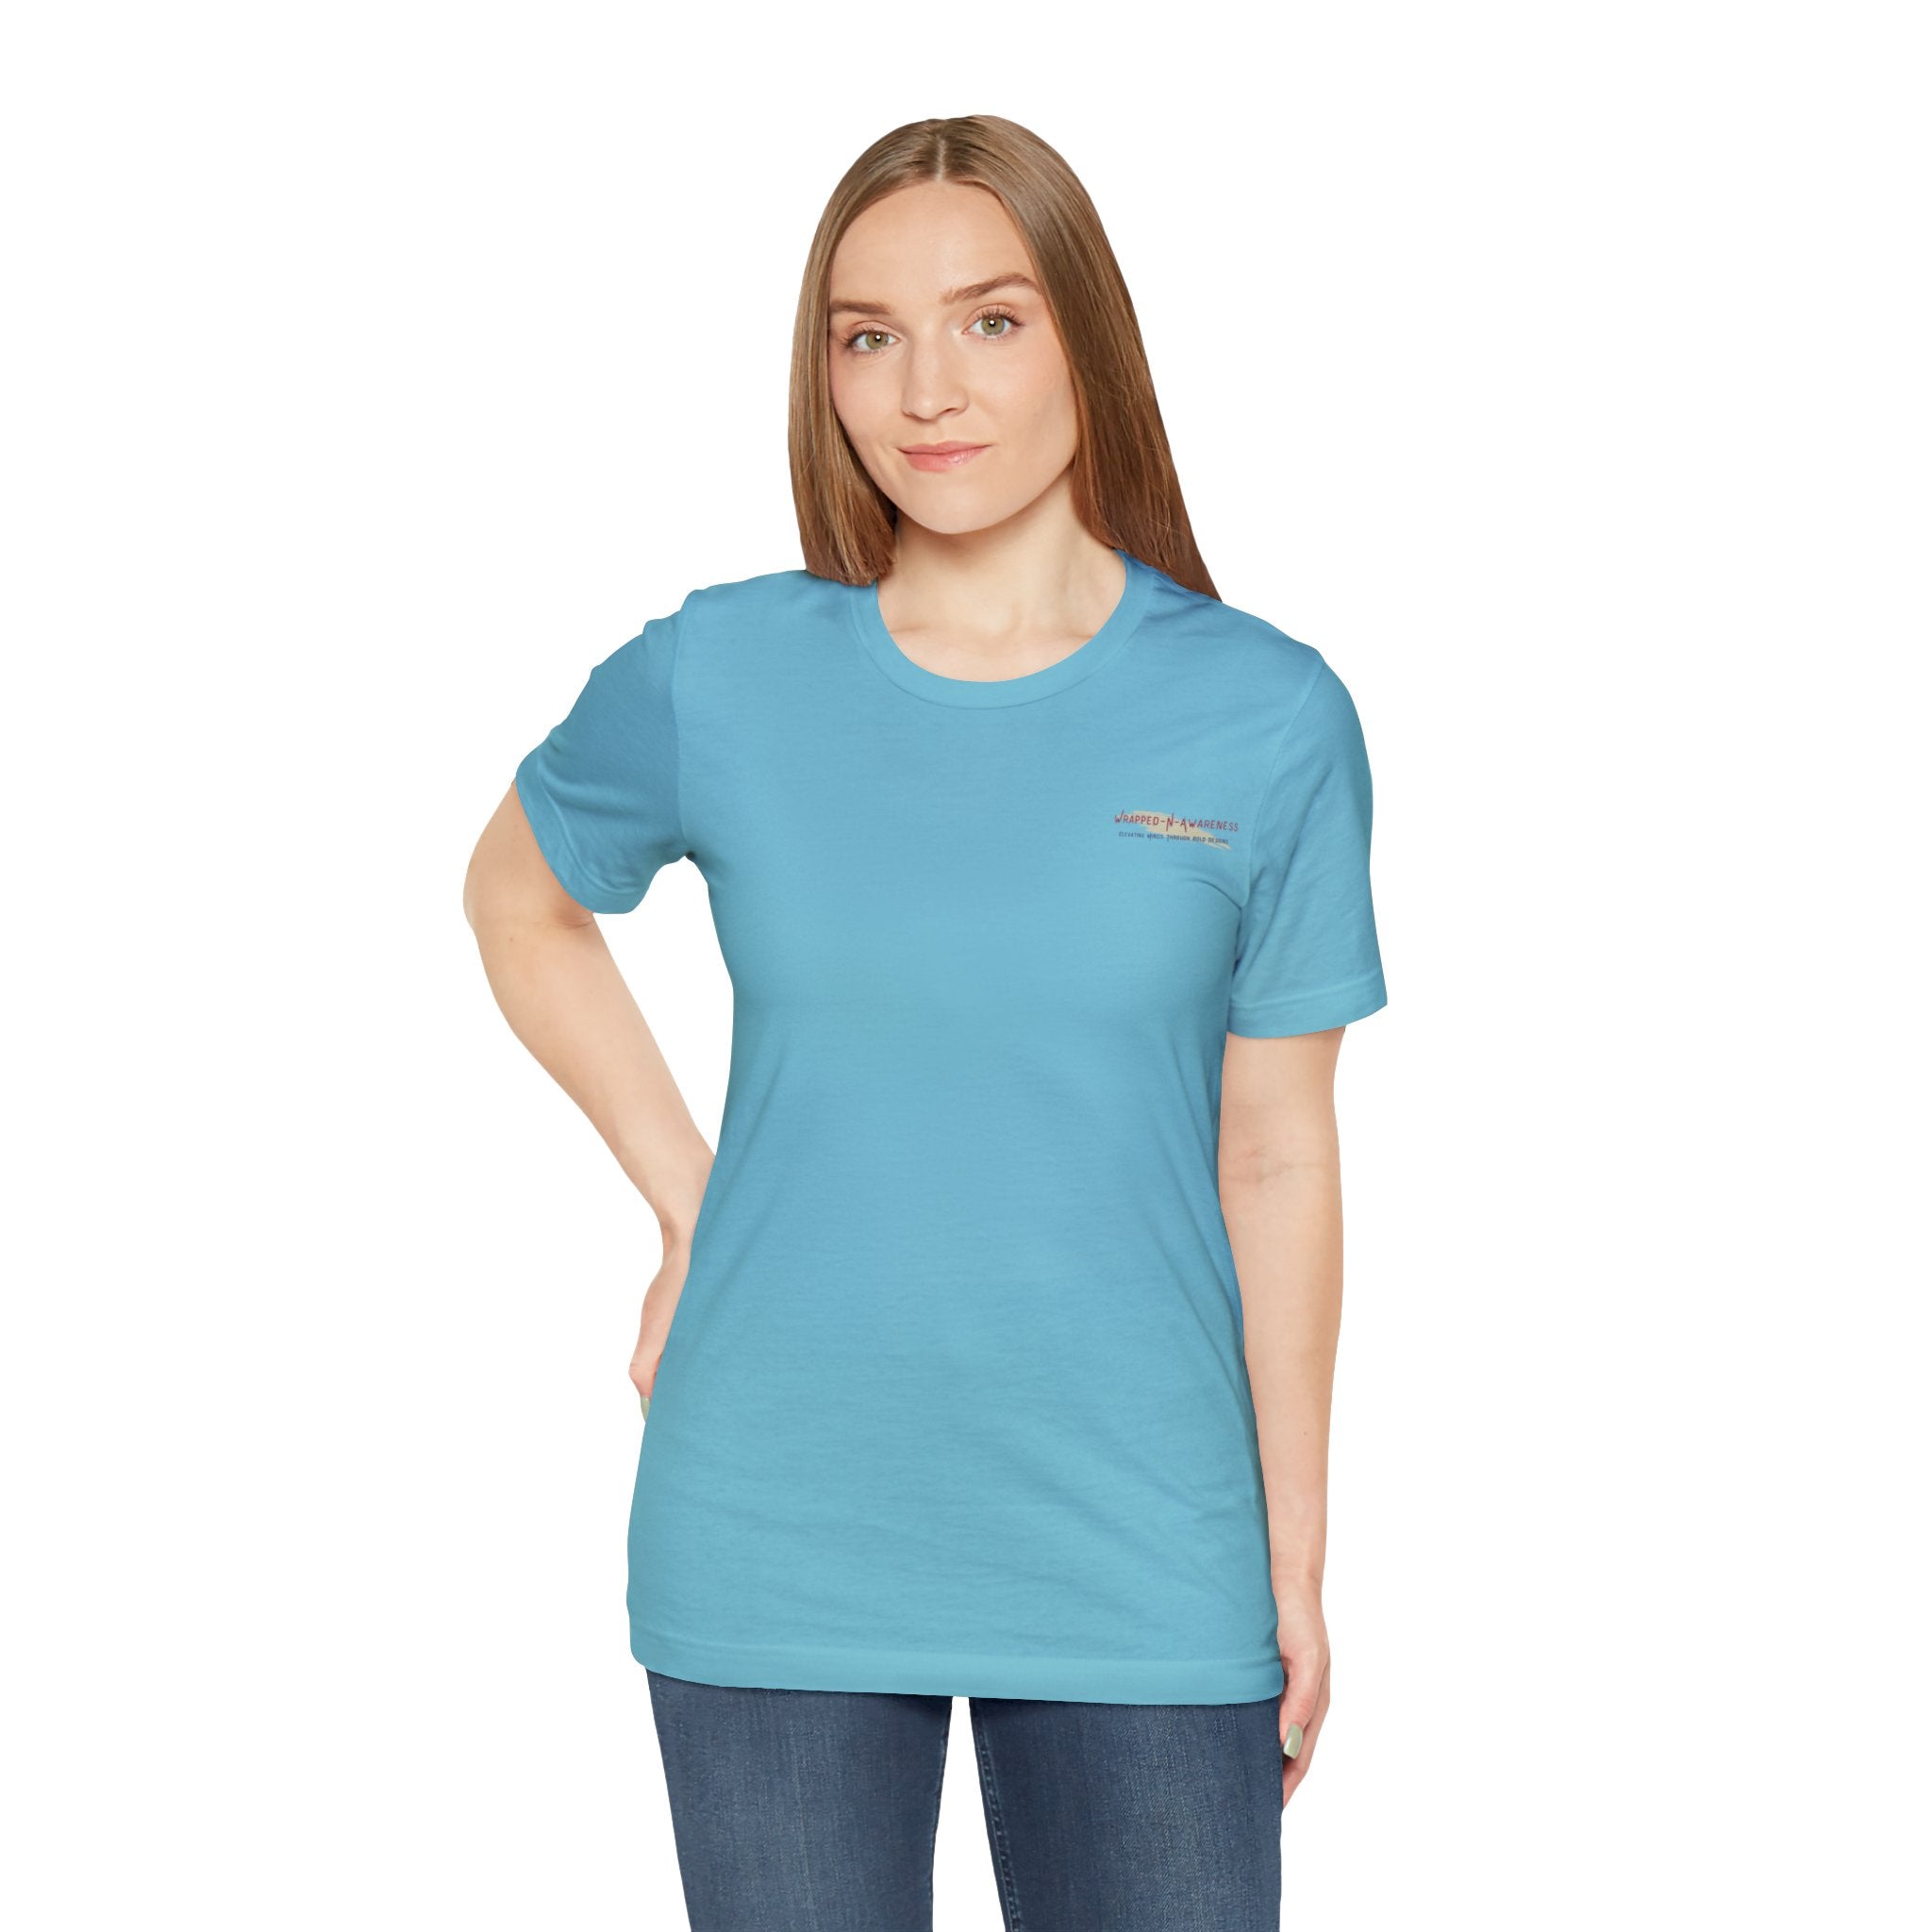 Release Your Mind Jersey Tee - Bella+Canvas 3001 Turquoise Airlume Cotton Bella+Canvas 3001 Crew Neckline Jersey Short Sleeve Lightweight Fabric Mental Health Support Retail Fit Tear-away Label Tee Unisex Tee T-Shirt 13772951113542016858_2048 Printify